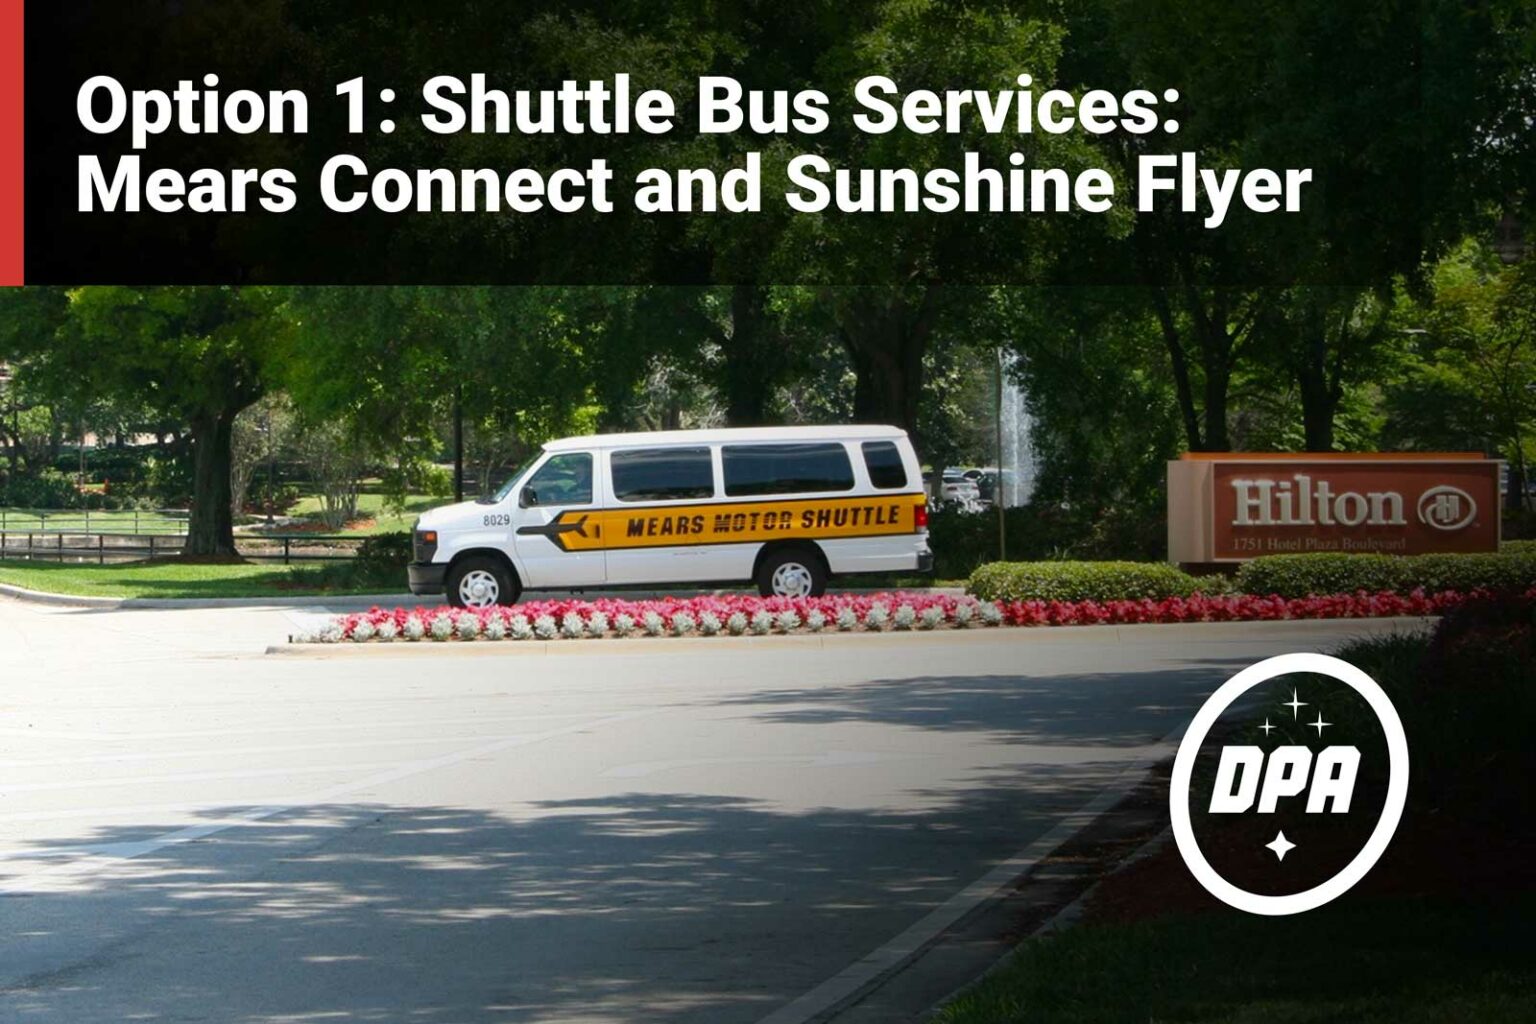 Option 1: Shuttle Bus Services: Mears Connect and Sunshine Flyer